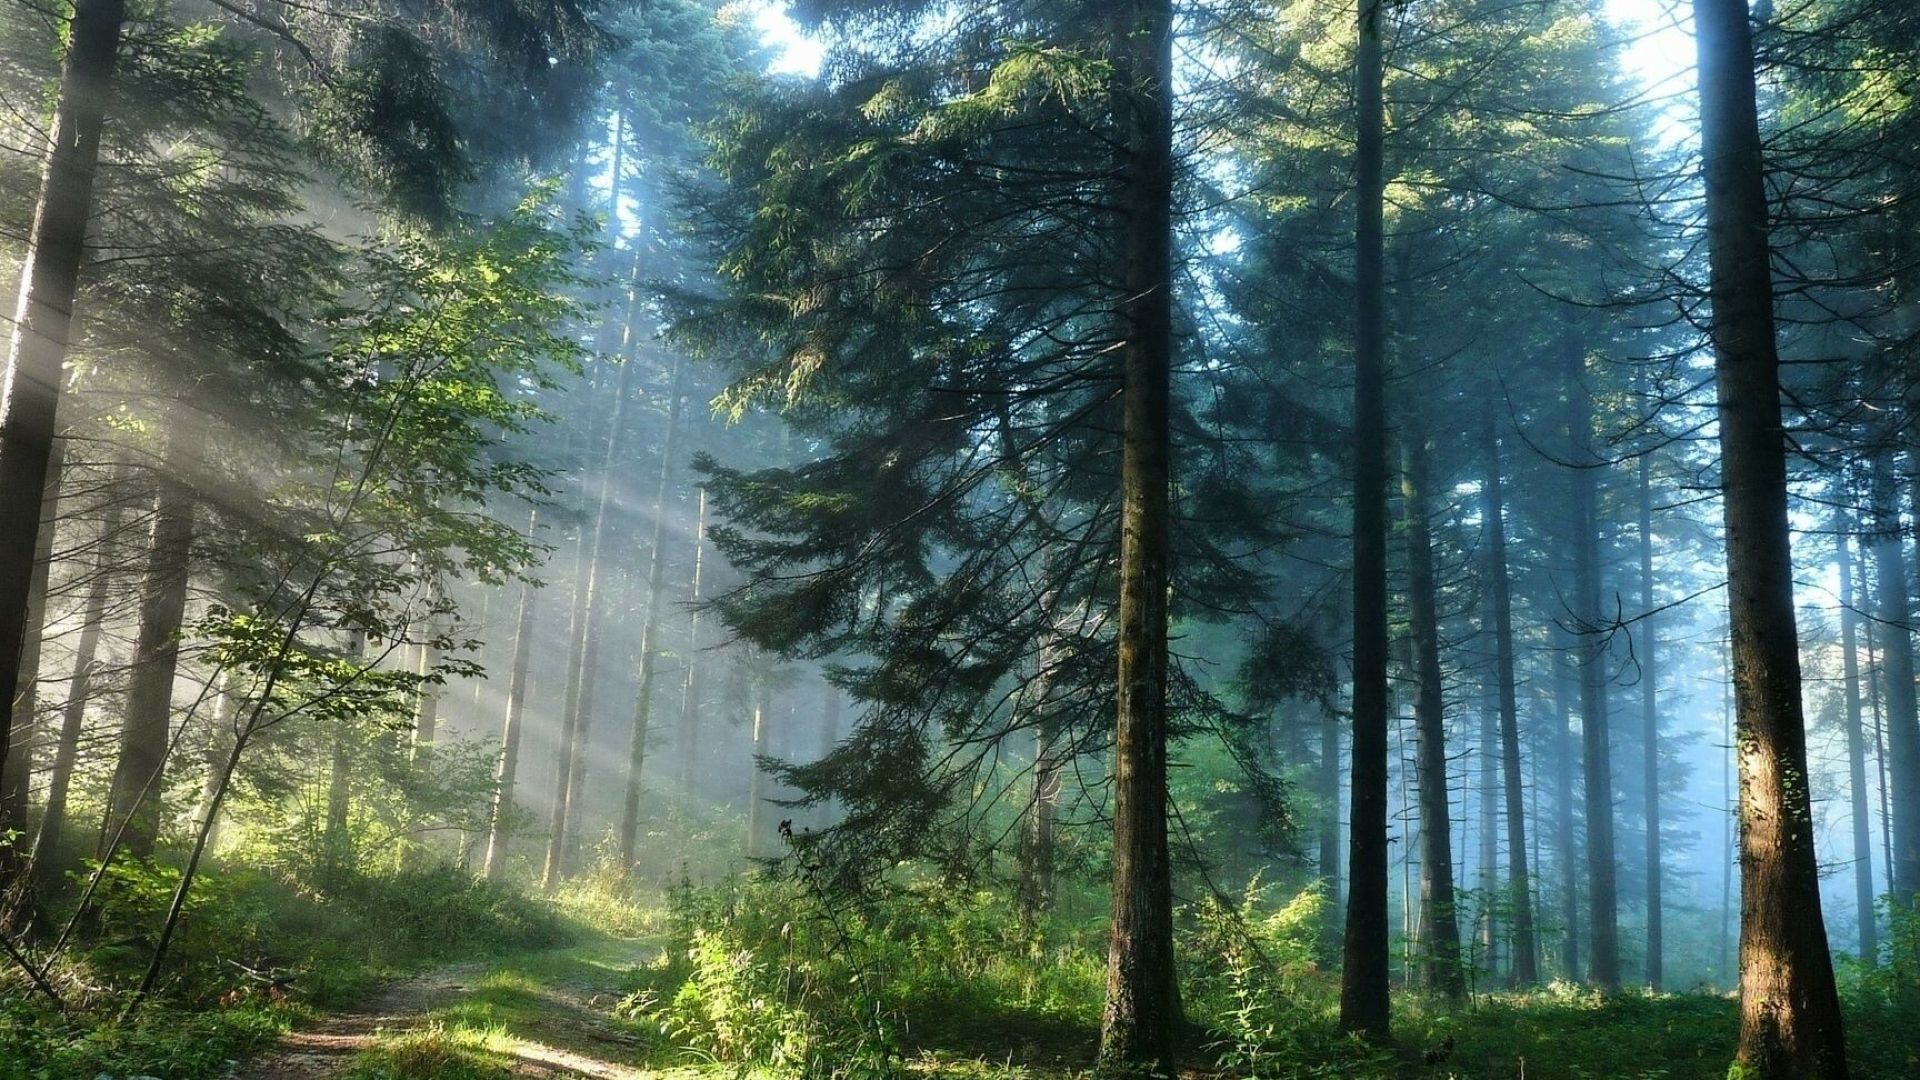 iPhone forest wallpapers, Mobile nature escape, Serenity at your fingertips, Explore the forest, 1920x1080 Full HD Desktop